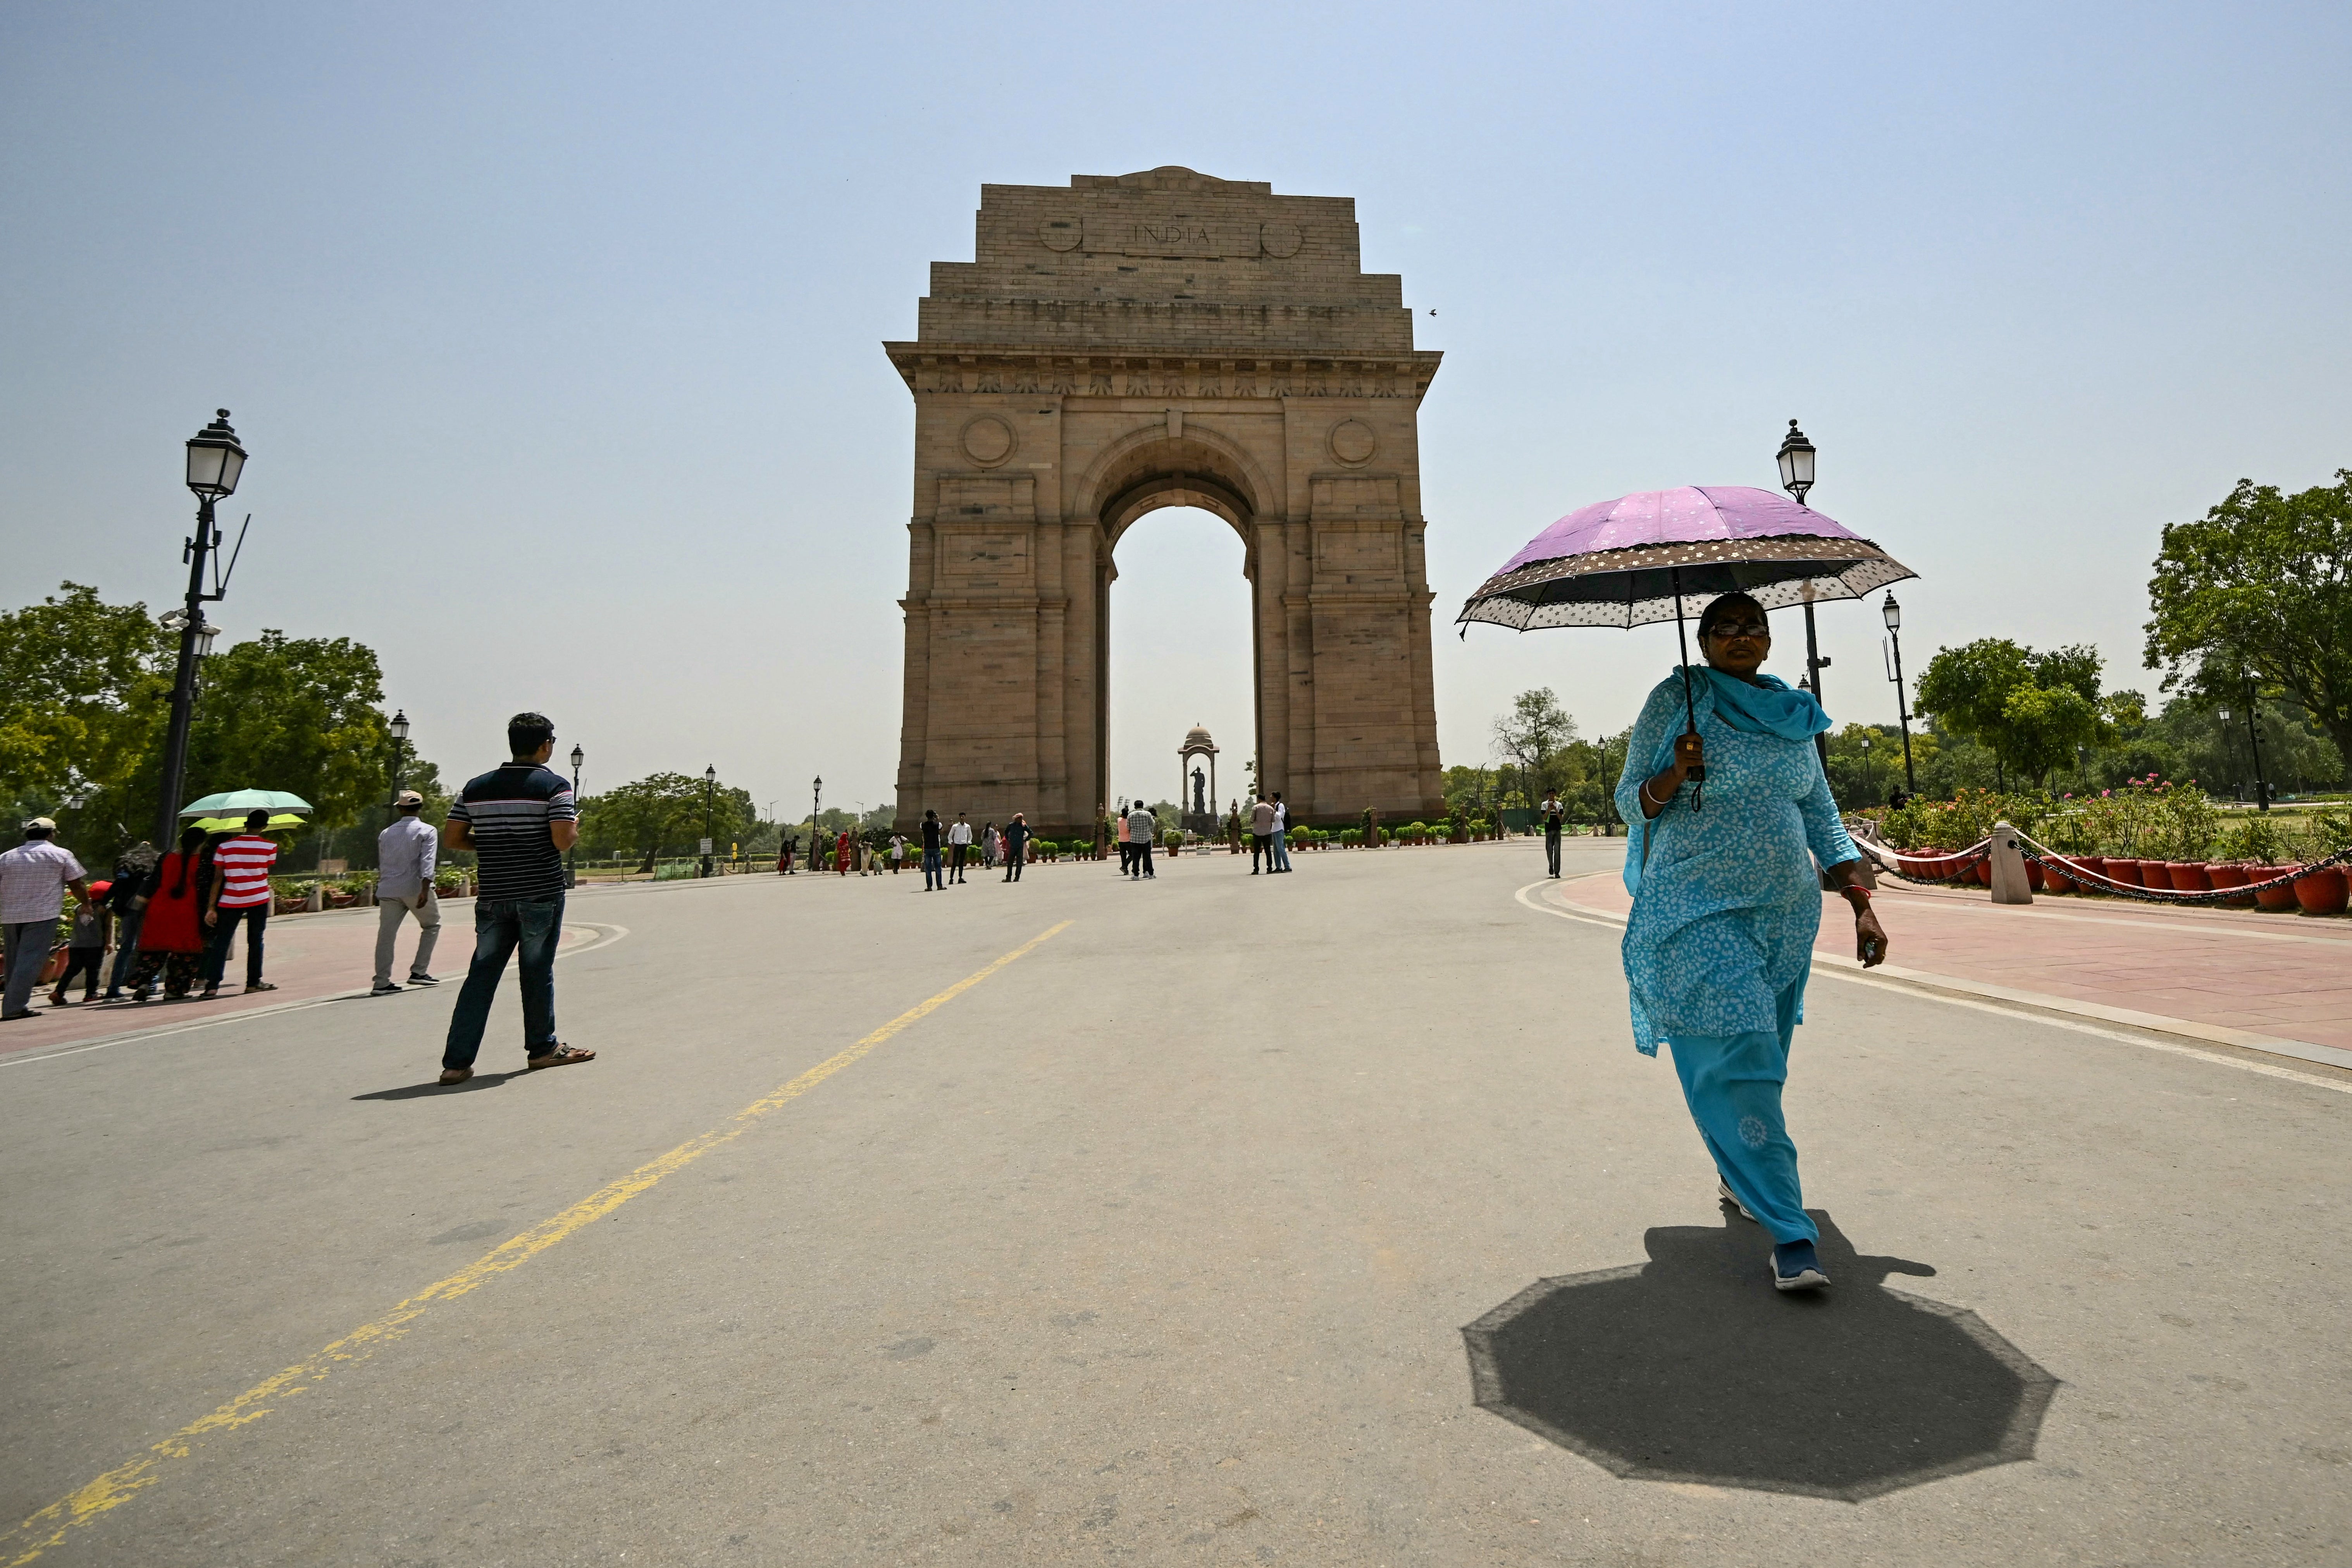 A woman is walking near India Gate holding an umbrella in the sweltering heat of Delhi.